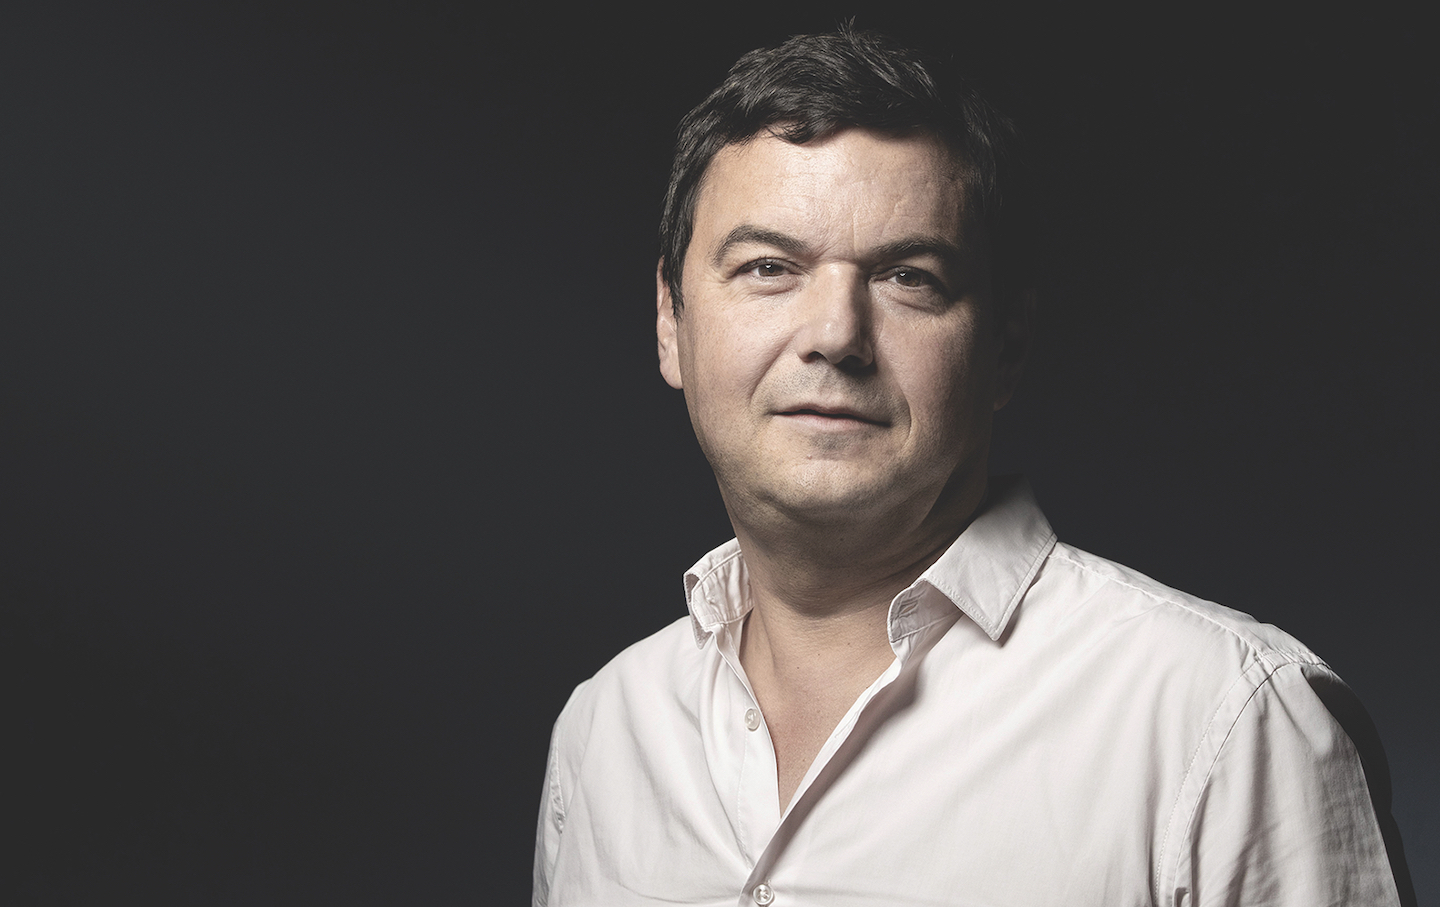 capital book by thomas piketty